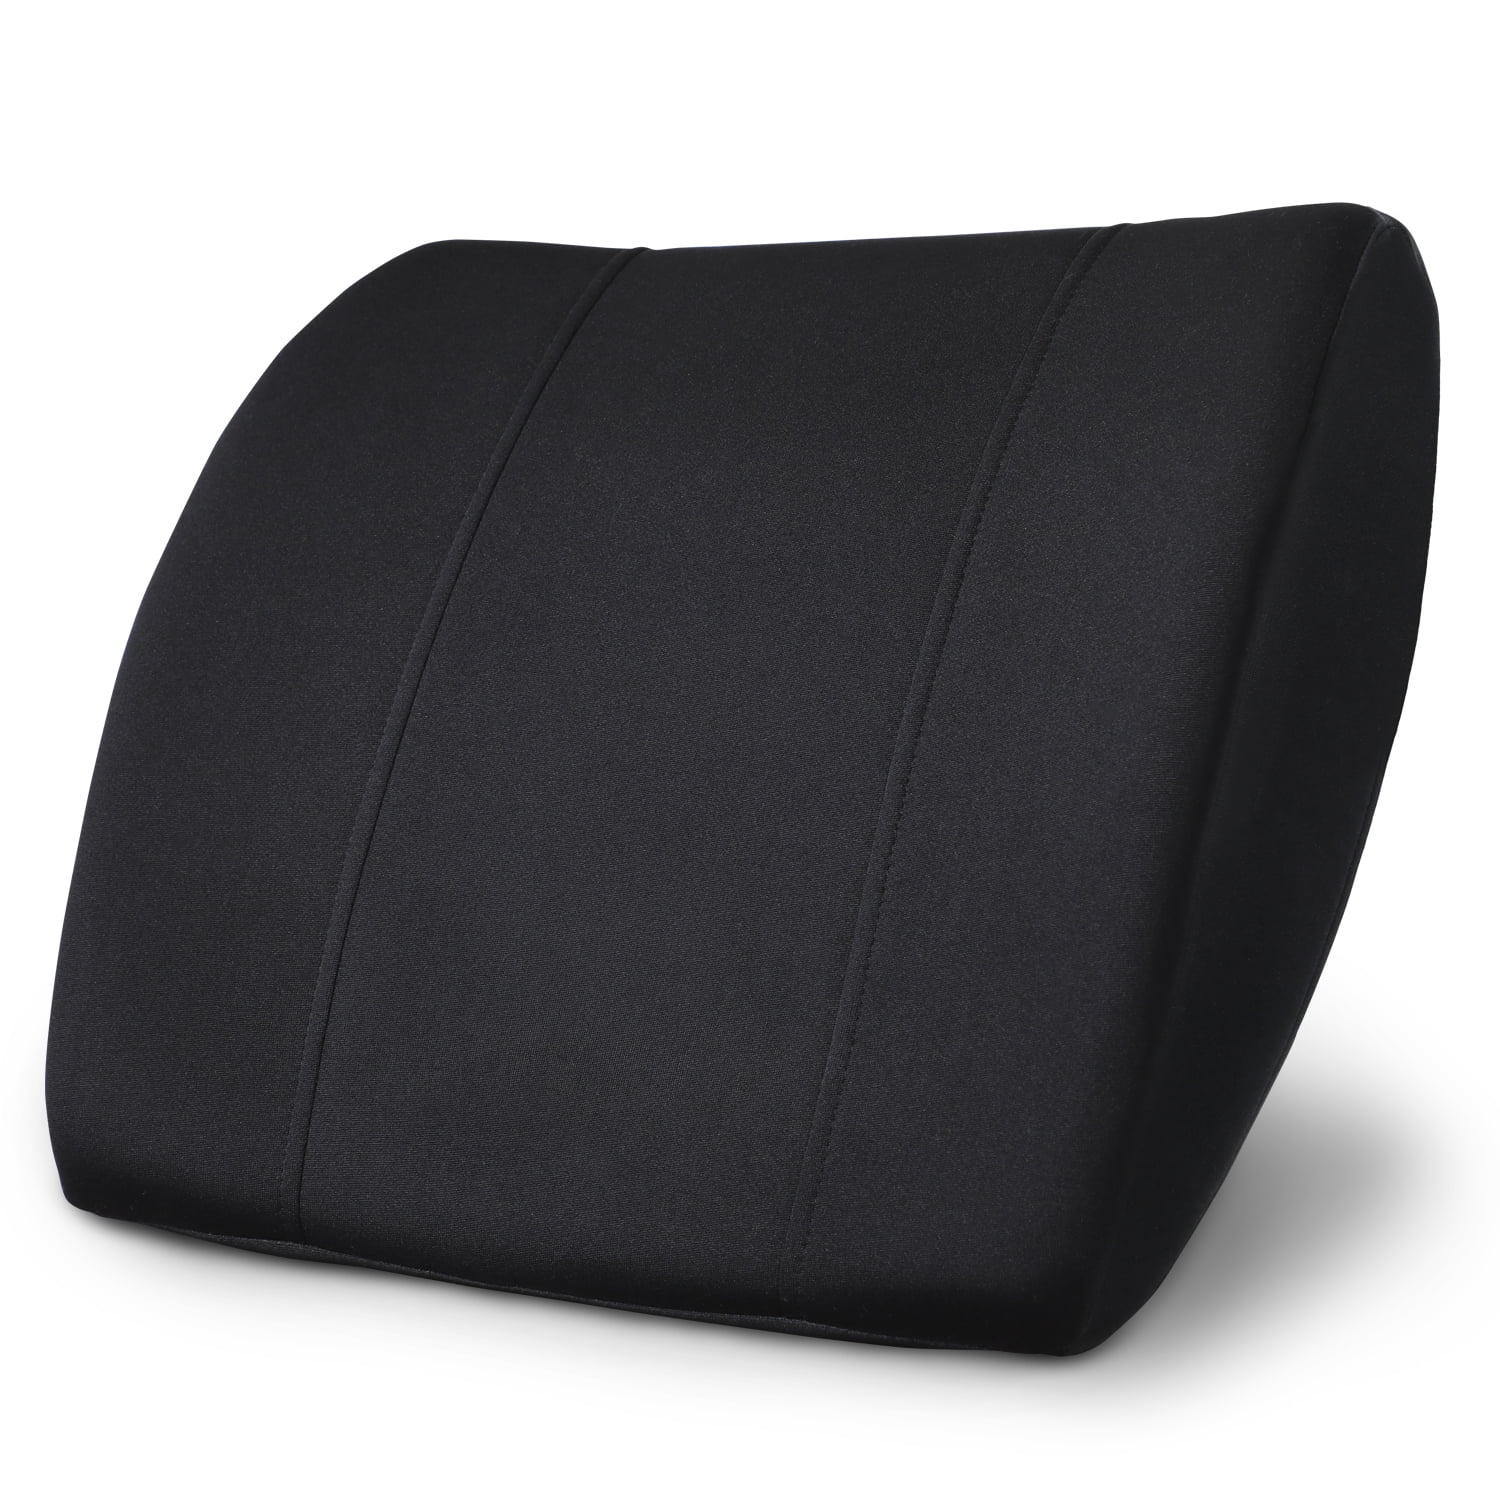 MotorTrend Lumbar Back Support, Portable Orthopedic Lumbar Back Support Memory Foam and PU Leather Seat Cushion, Black